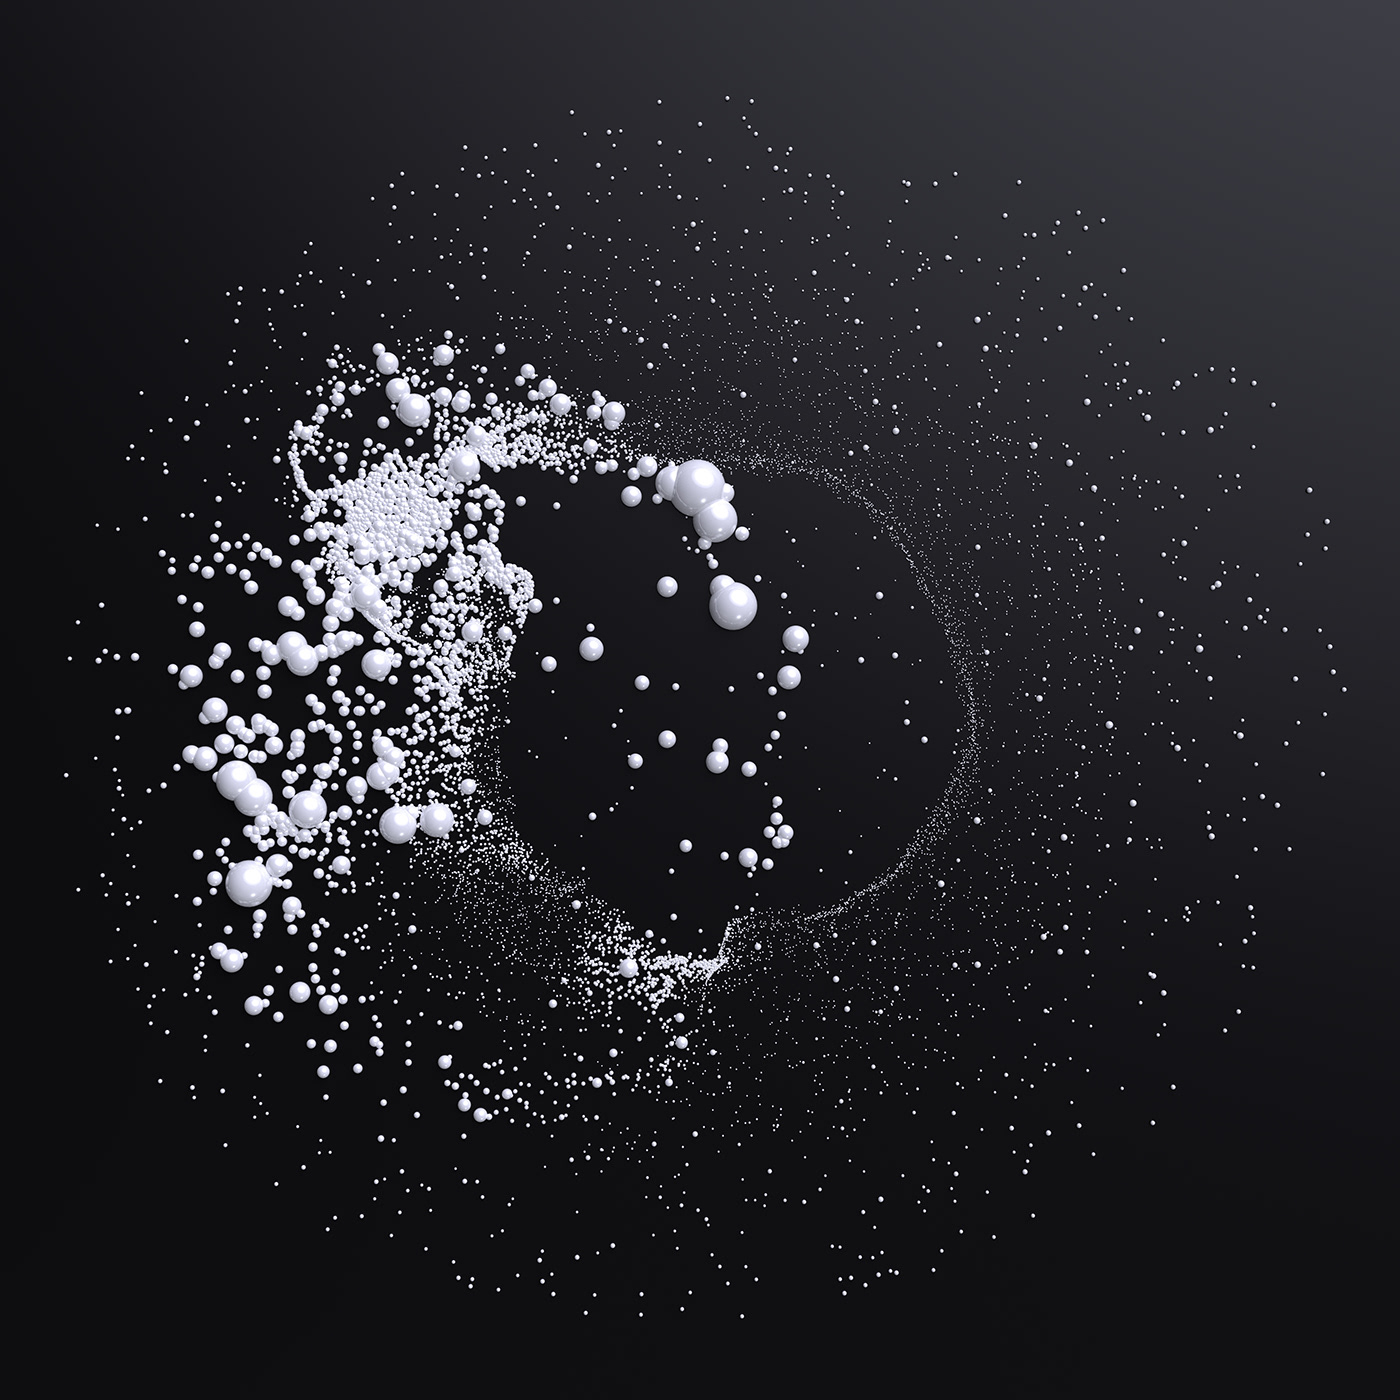 cinema 4d corona renderer Cycles 4D for fun Octane Render personnal work xparticles